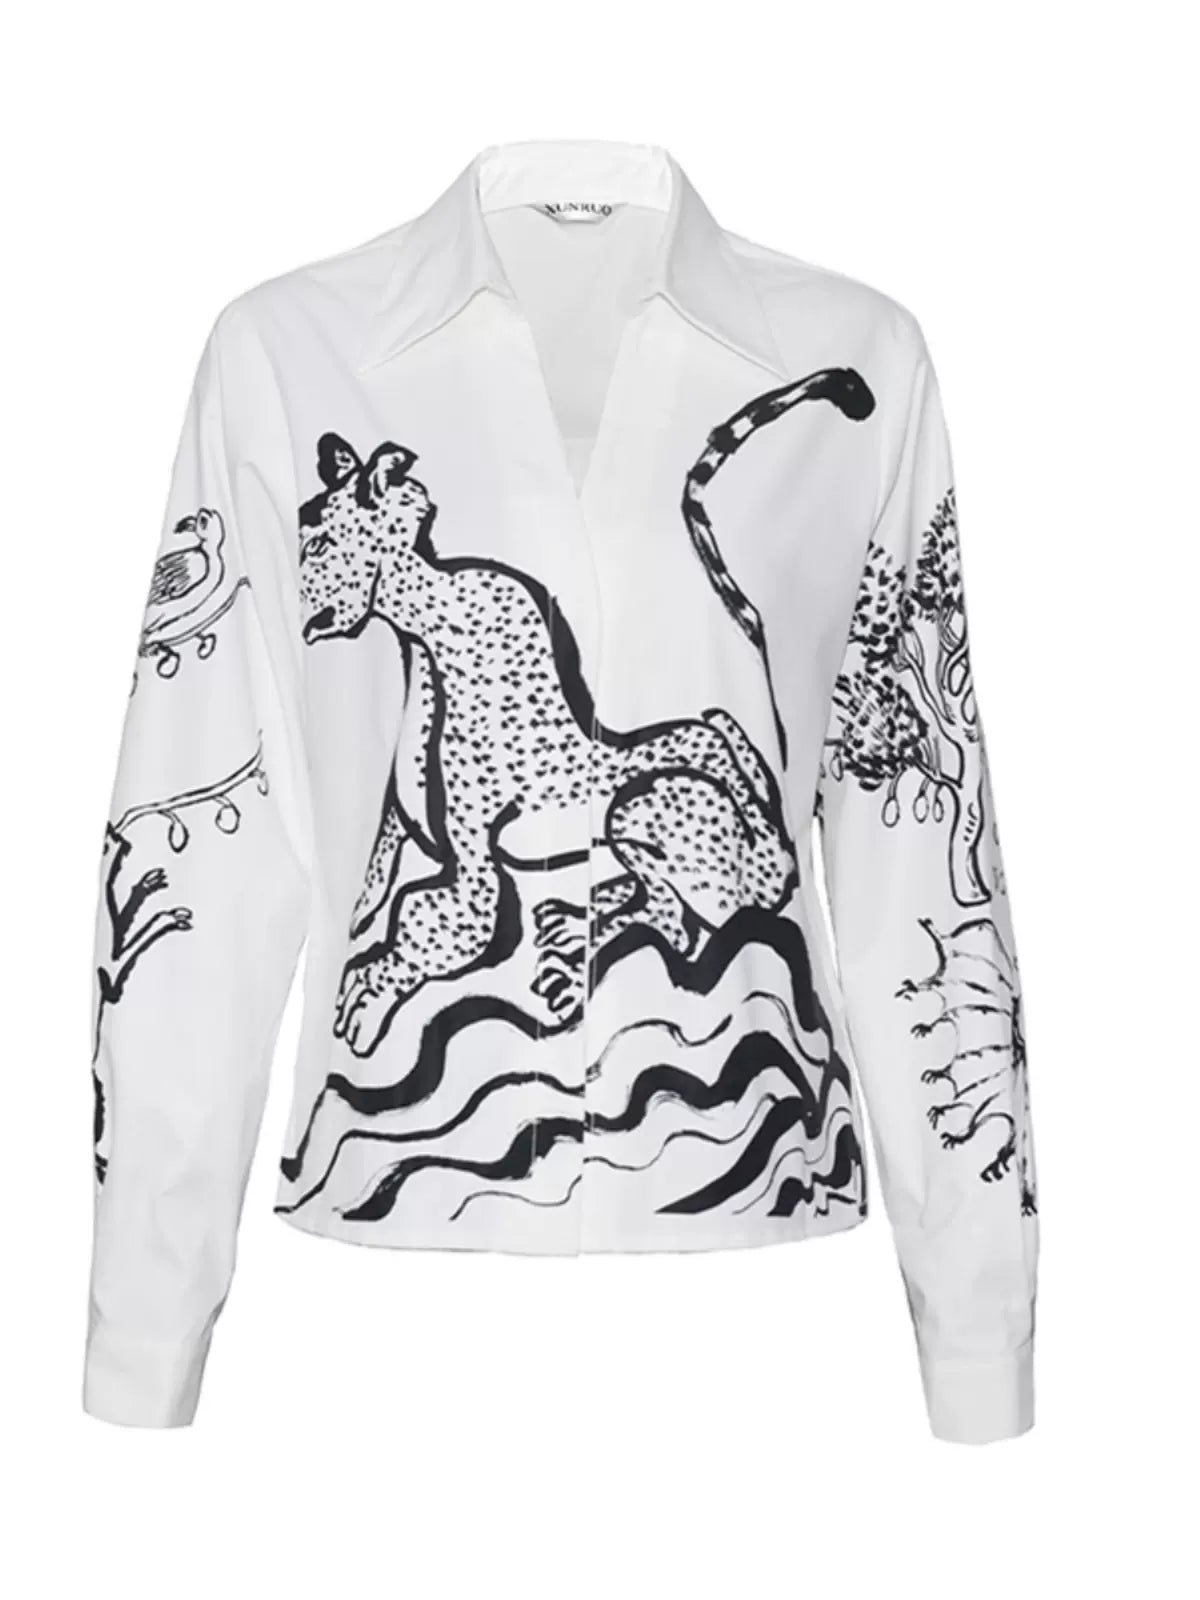 leopard panther print long-sleeved black and white shirt